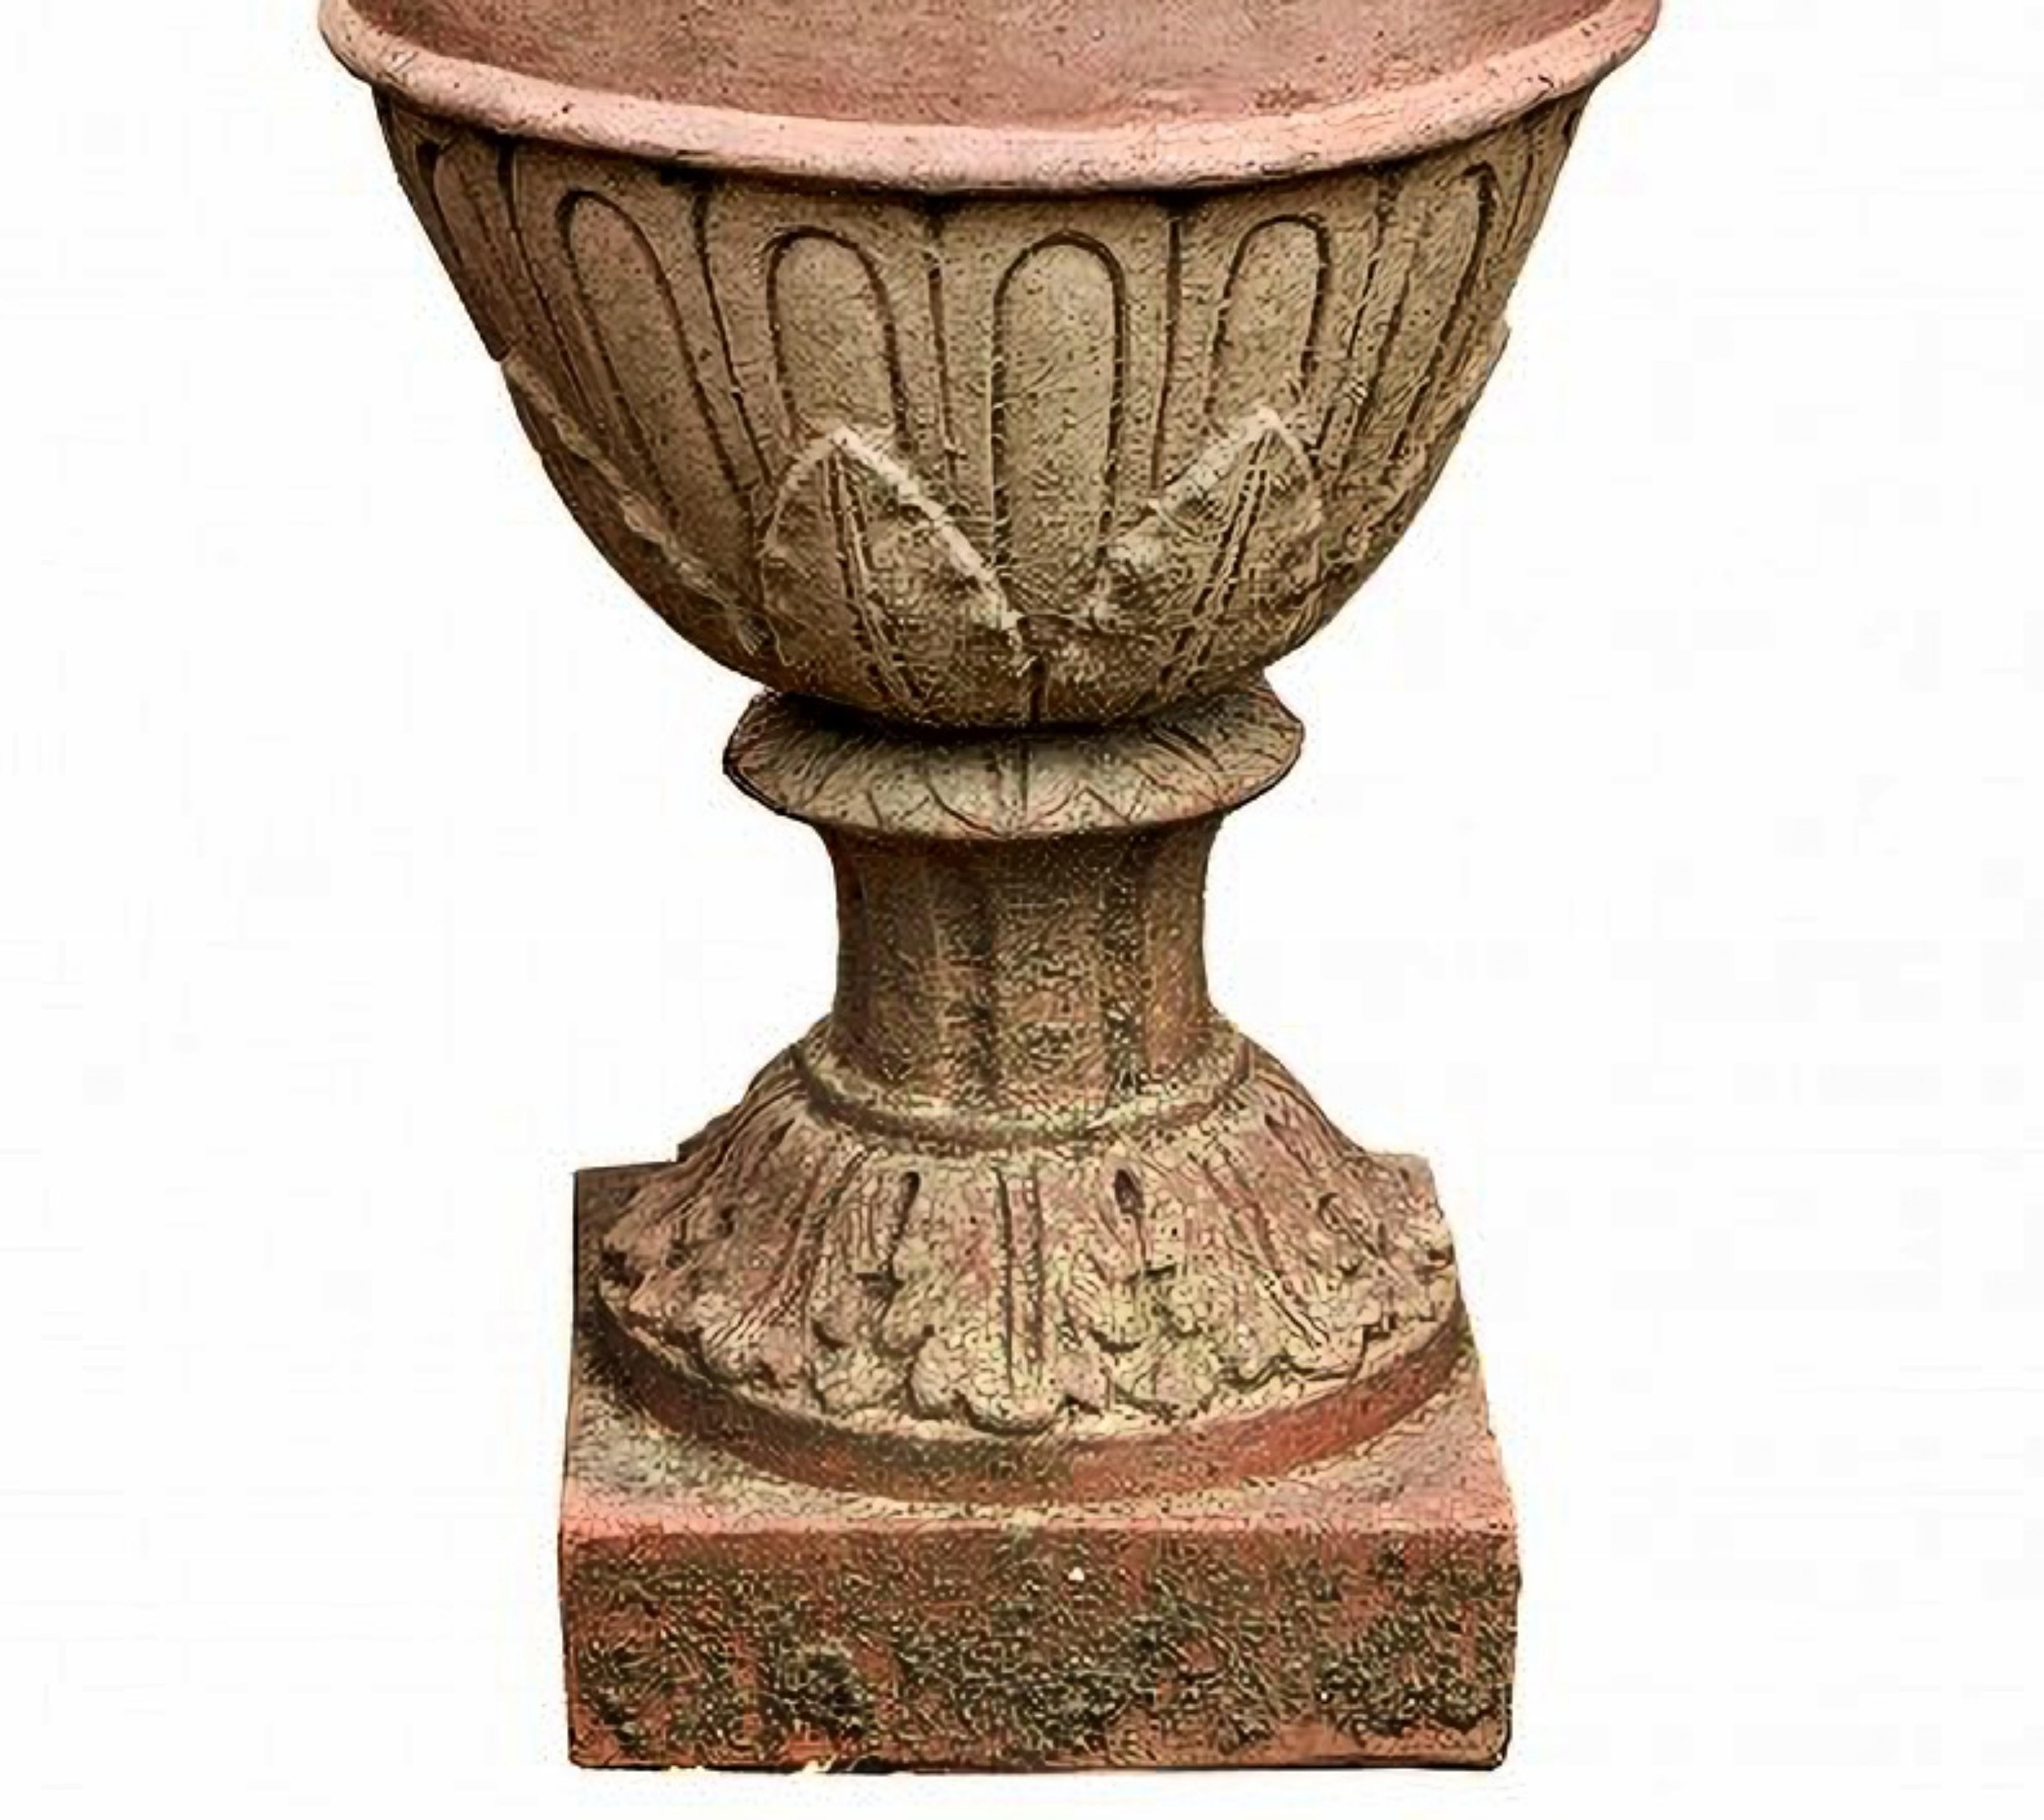 PAIR OF TUSCAN EMPIRE VASES WITH HANDLES - TERRACOTTA IMPRUNETA FLORENCE 20th Century

HEIGHT 83 cm
WEIGHT 35 kg
SQUARE BASE - SIDE X SIDE 21 X 21 cm
EXTERNAL DIAMETER 29 cm
INTERNAL DIAMETER 21 cm
MAXIMUM DIAMETER 34 cm
MAXIMUM WIDTH 41